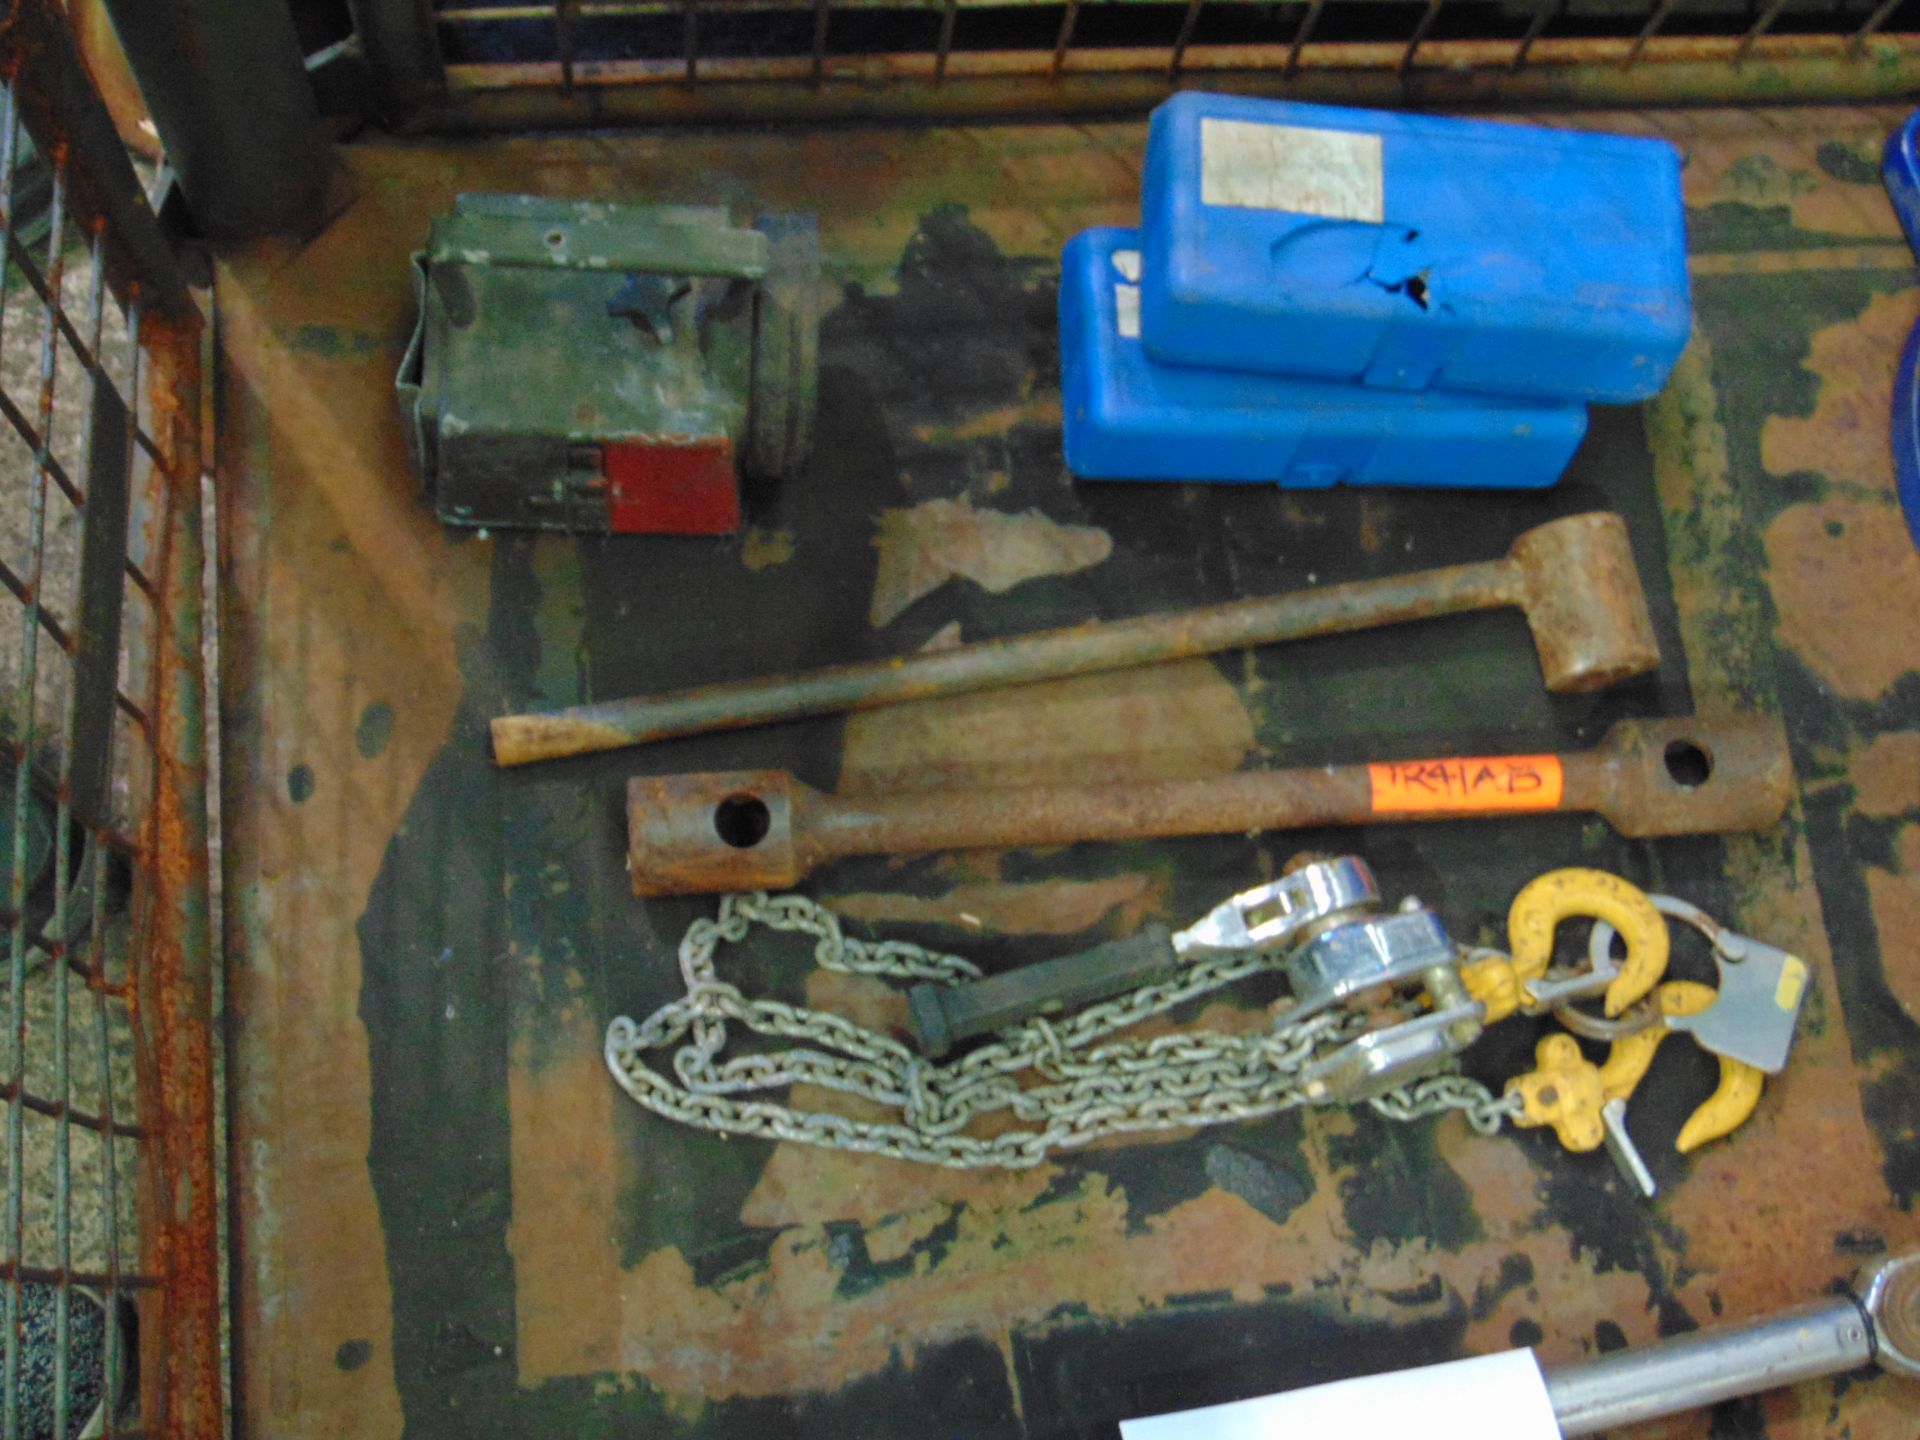 1X STILLAGE OF RECOVERY EQUIPMENT TOOLS GREASE GUN ETC - Image 6 of 6